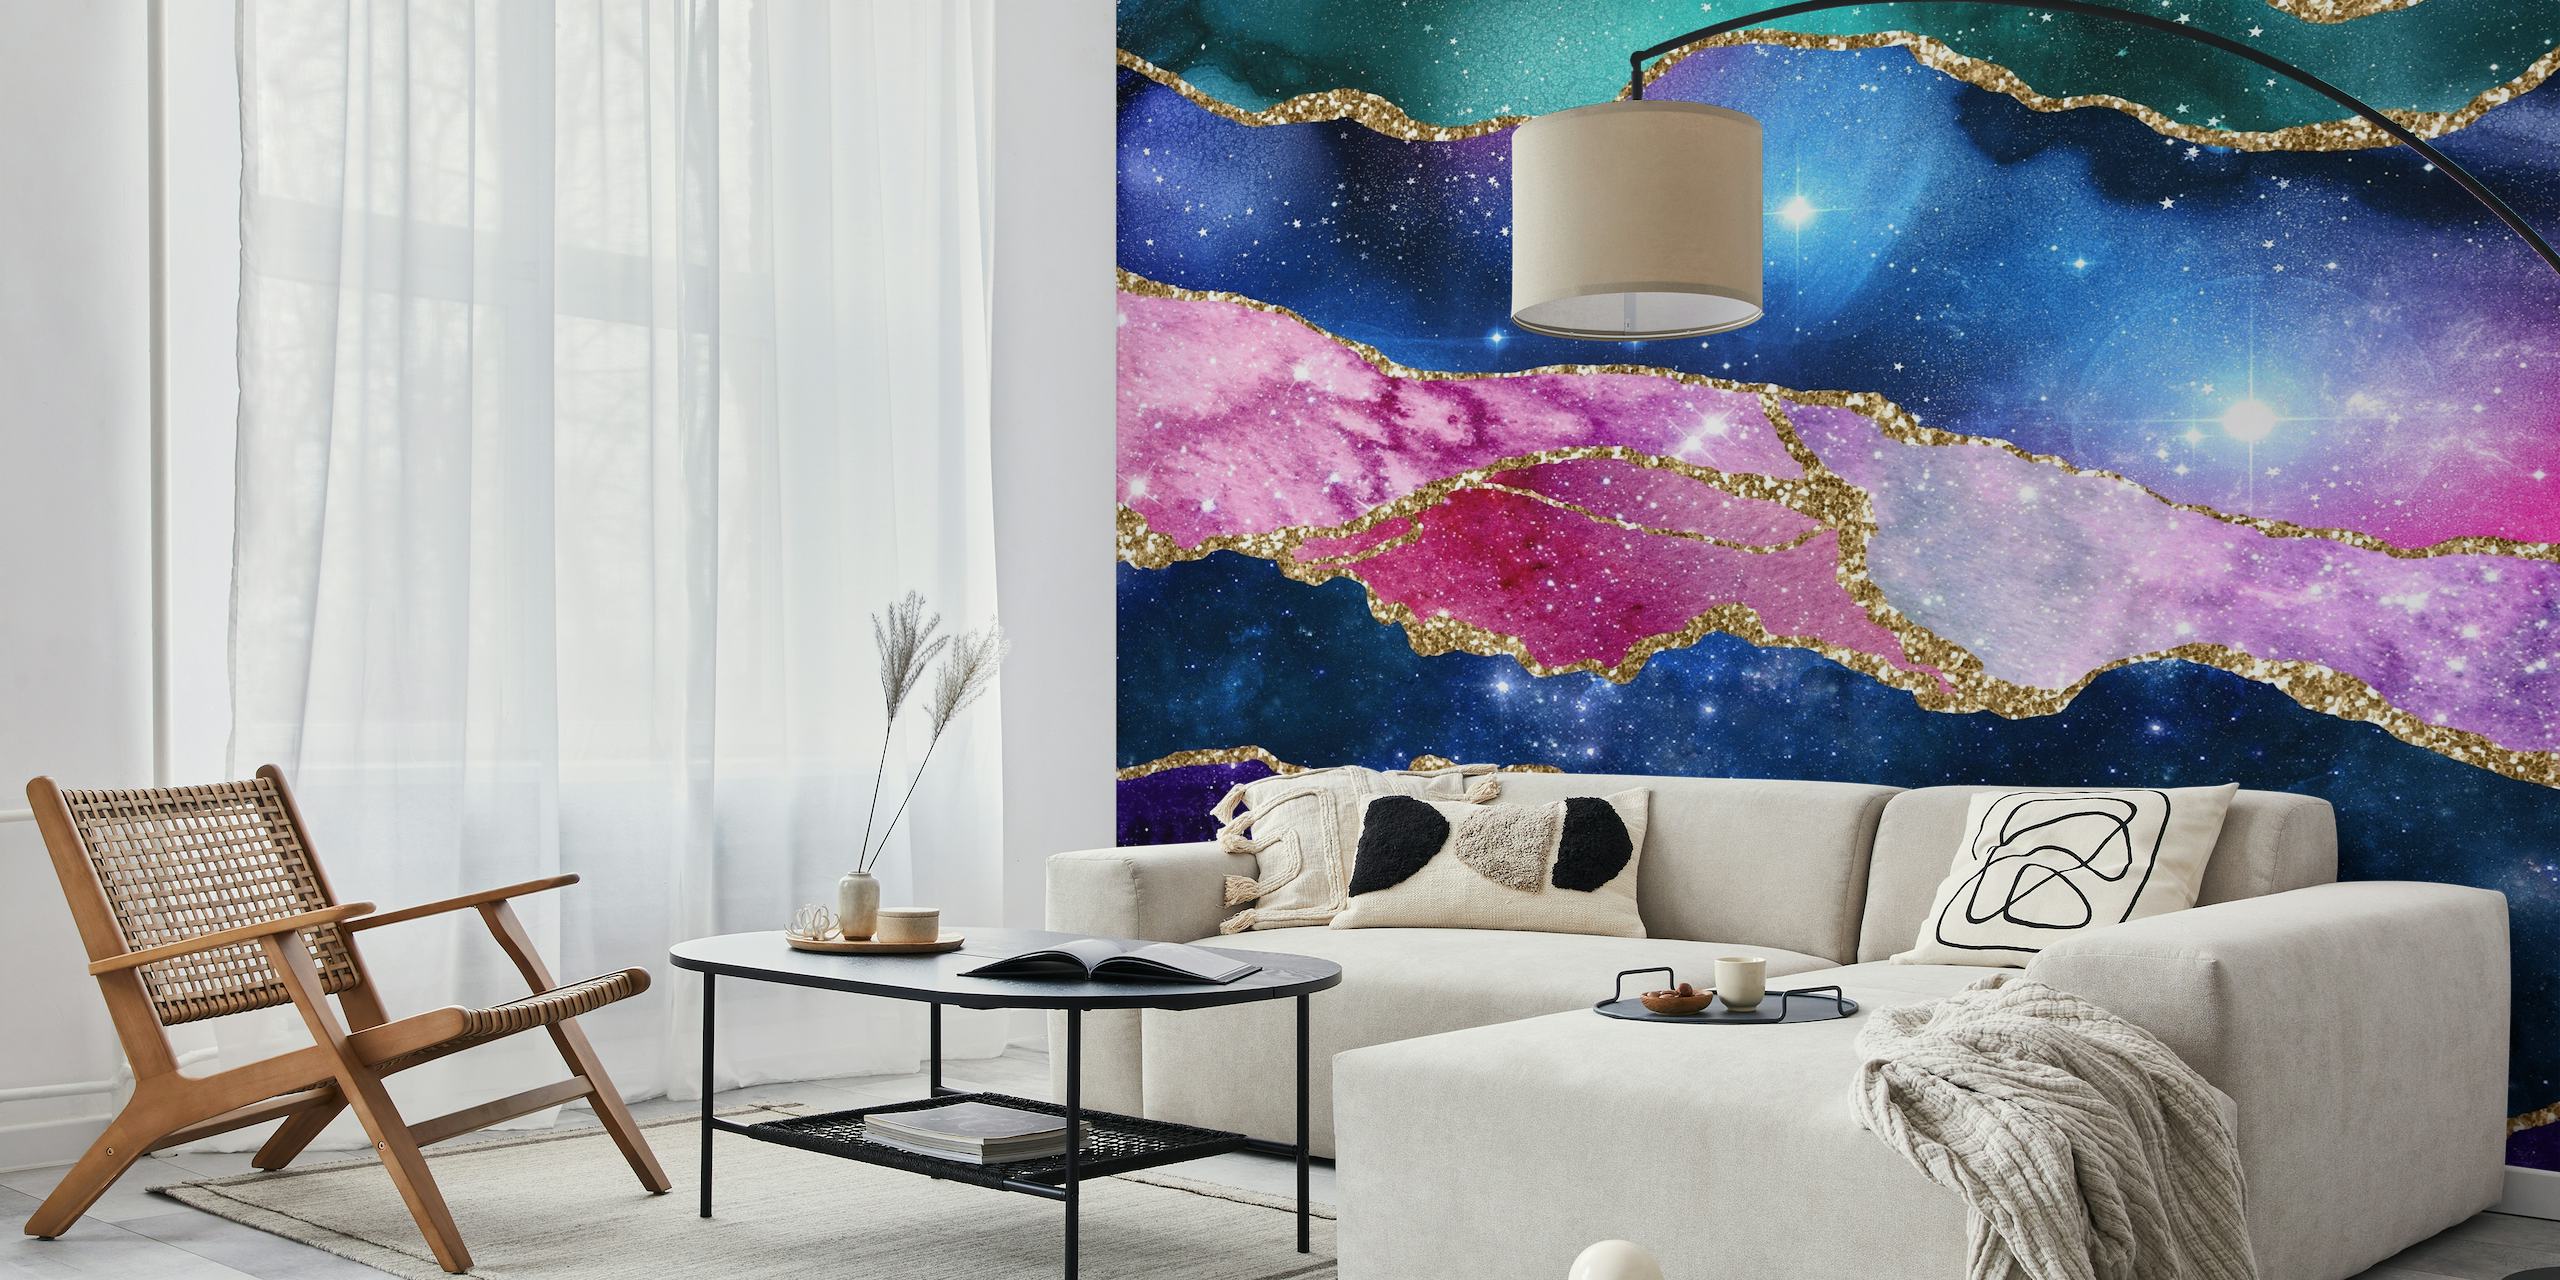 Pink and blue marble pattern with gold accents resembling a galaxy